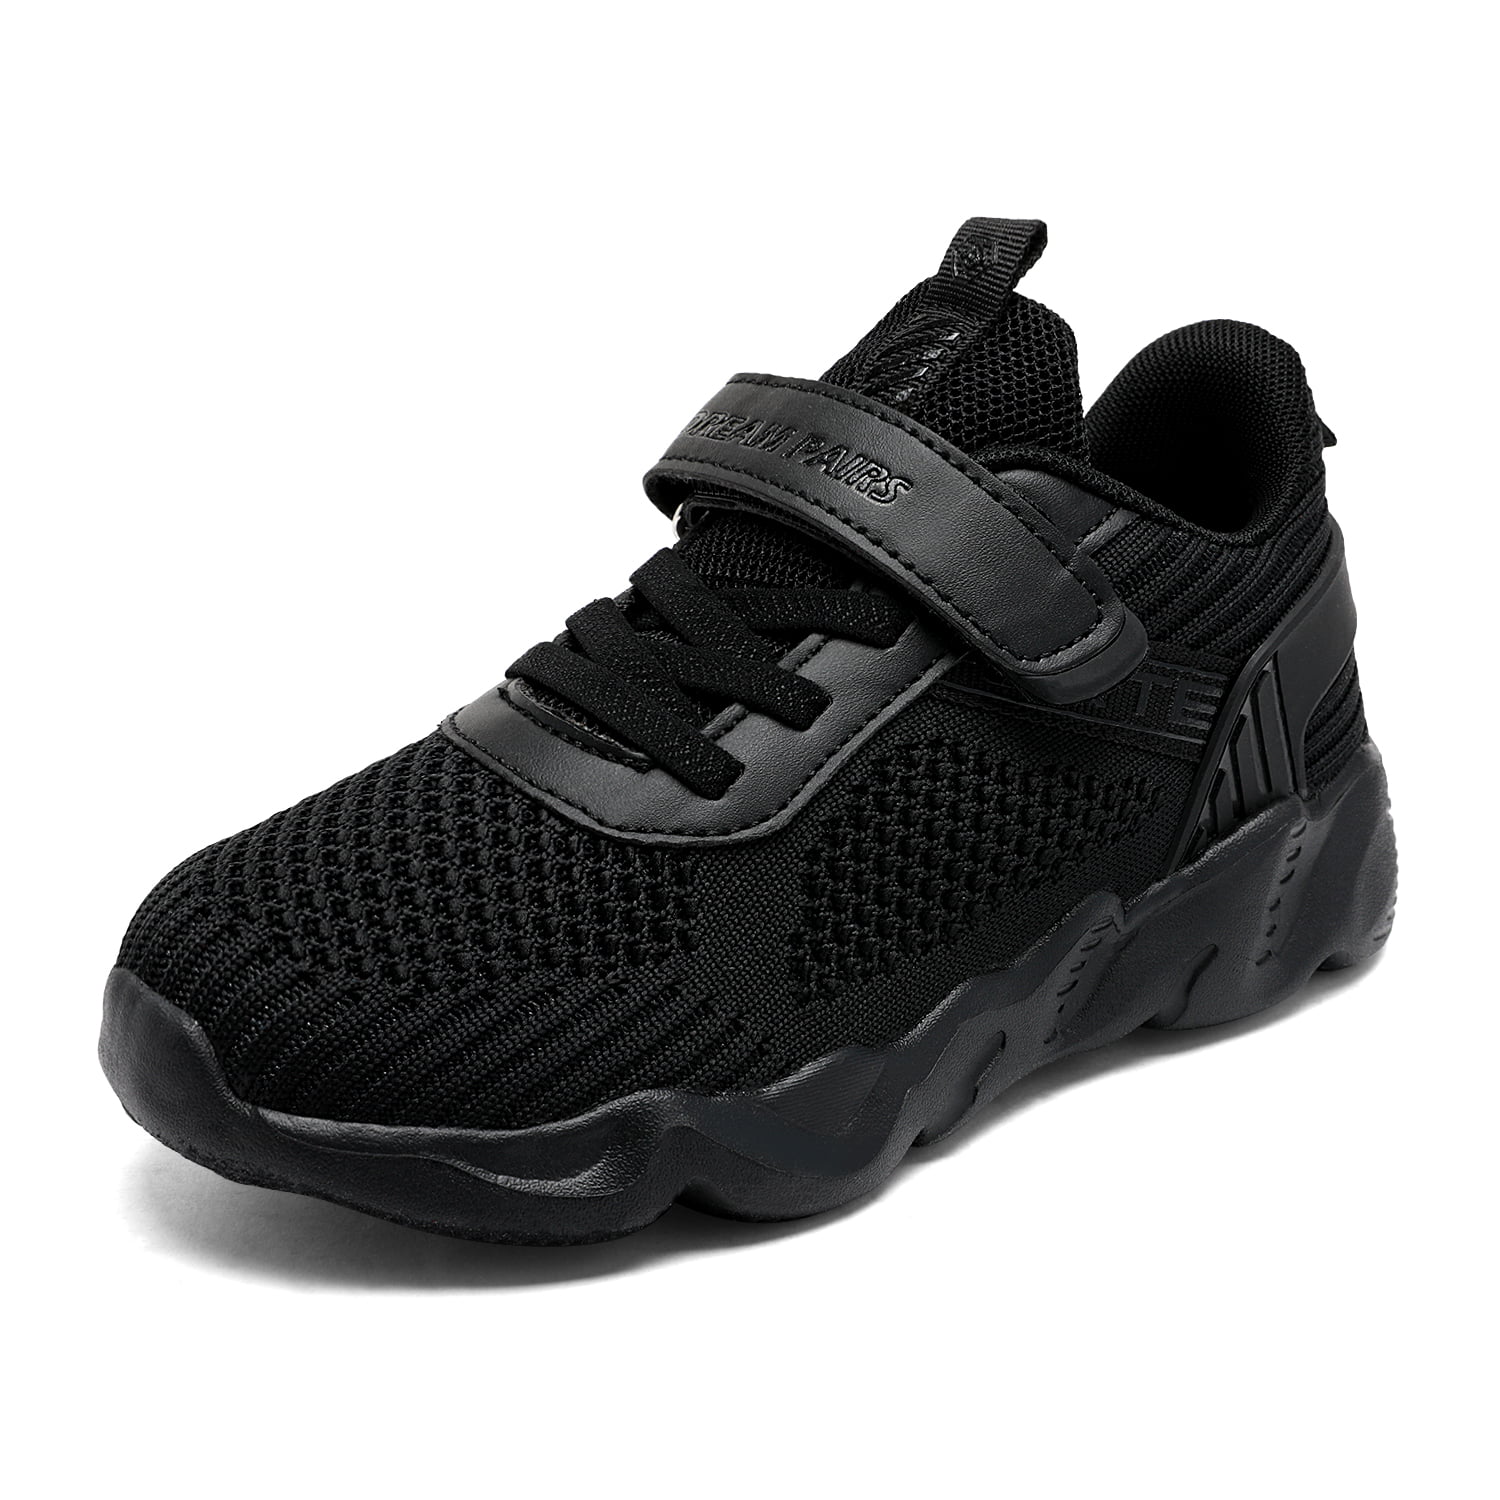 all black tennis shoes for girls